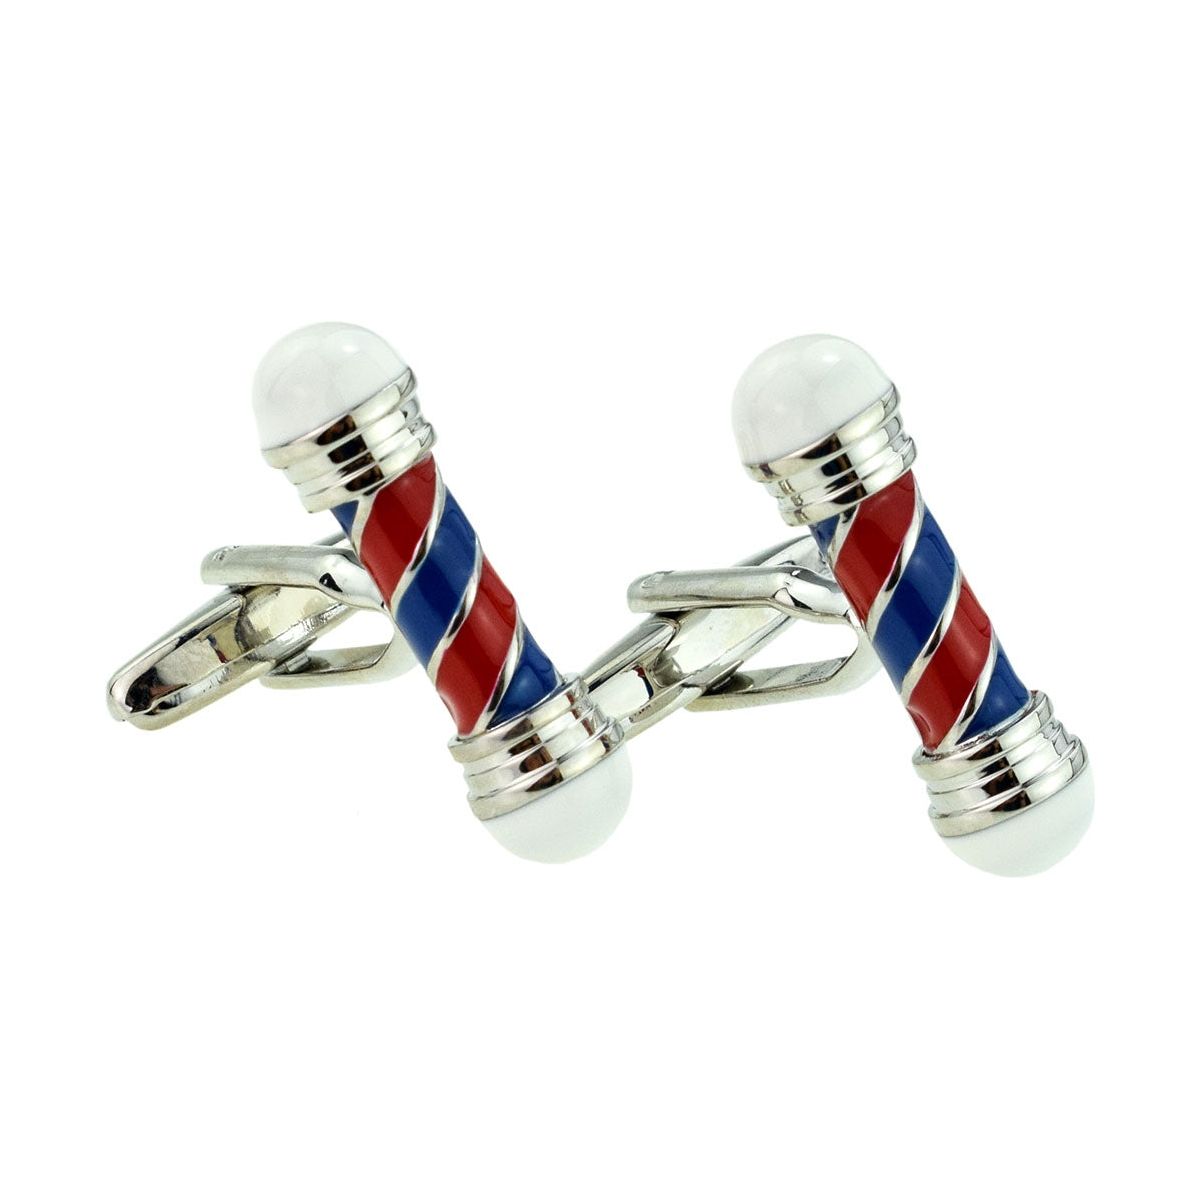 Red & Blue Barbers Pole Cufflinks - Ashton and Finch